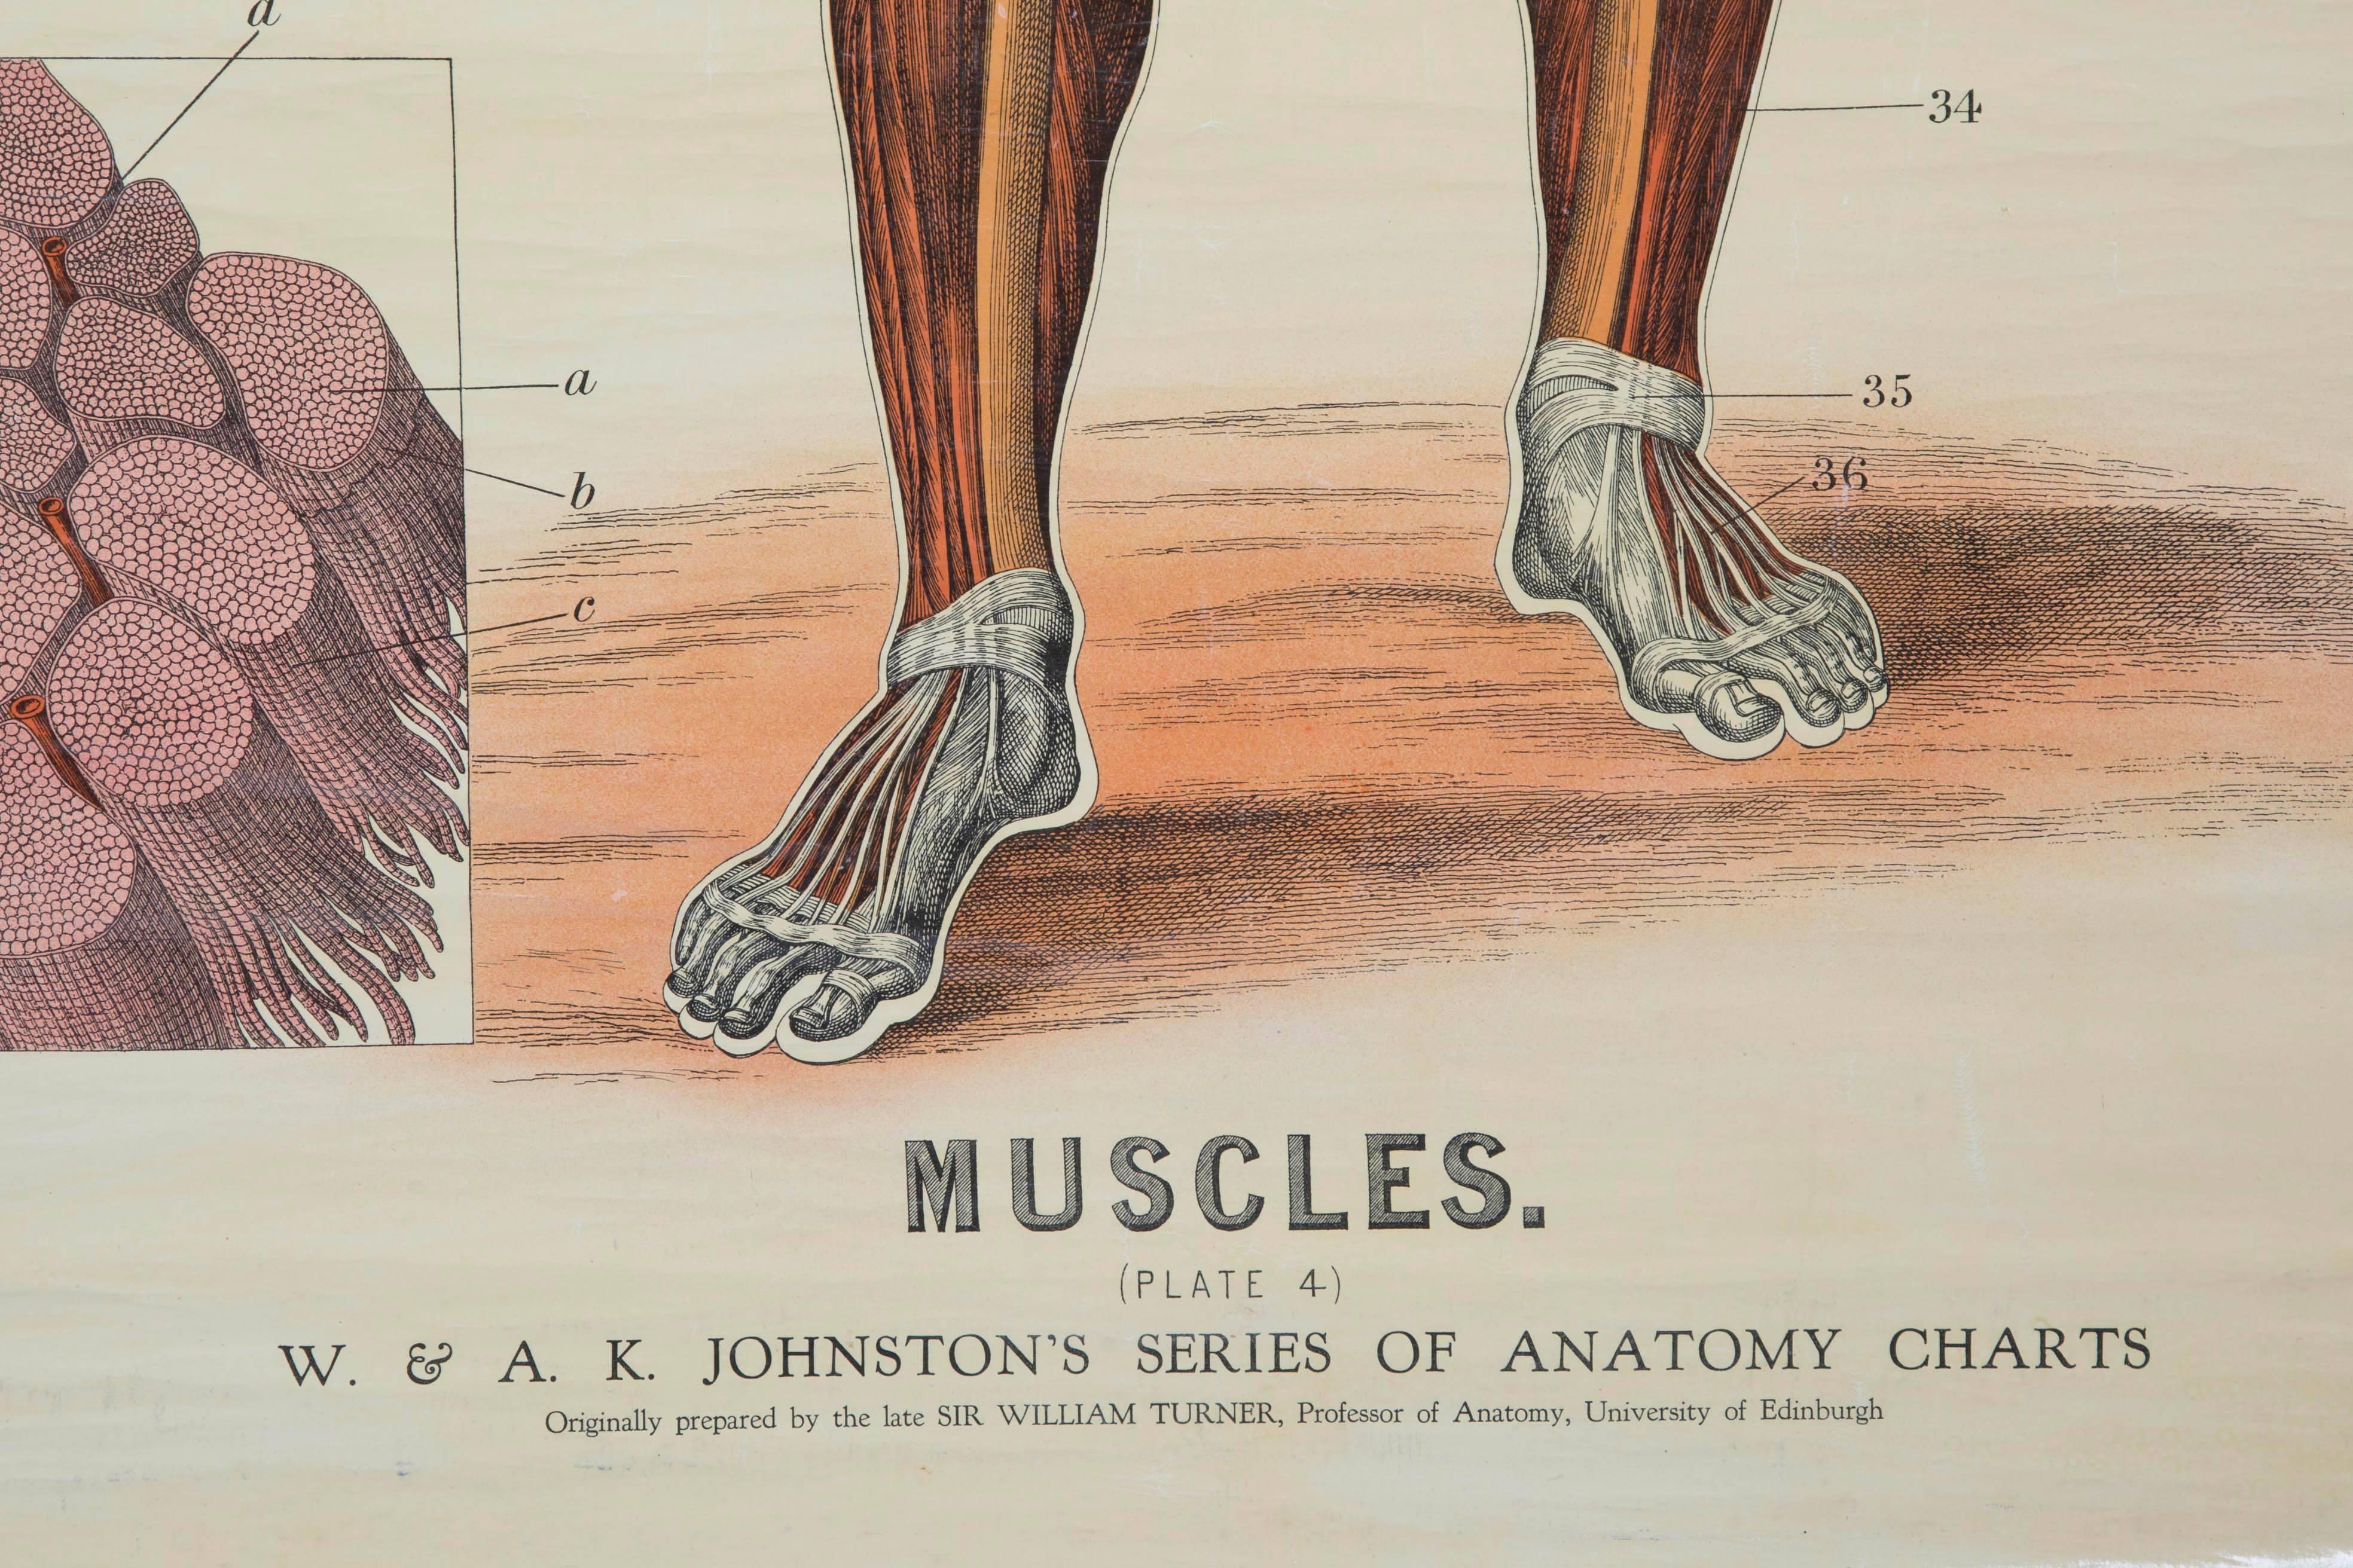 W&A J Johnstone early 20thc anatomical studies of Homo Sapiens, lithographically printed in polychromatic colors.